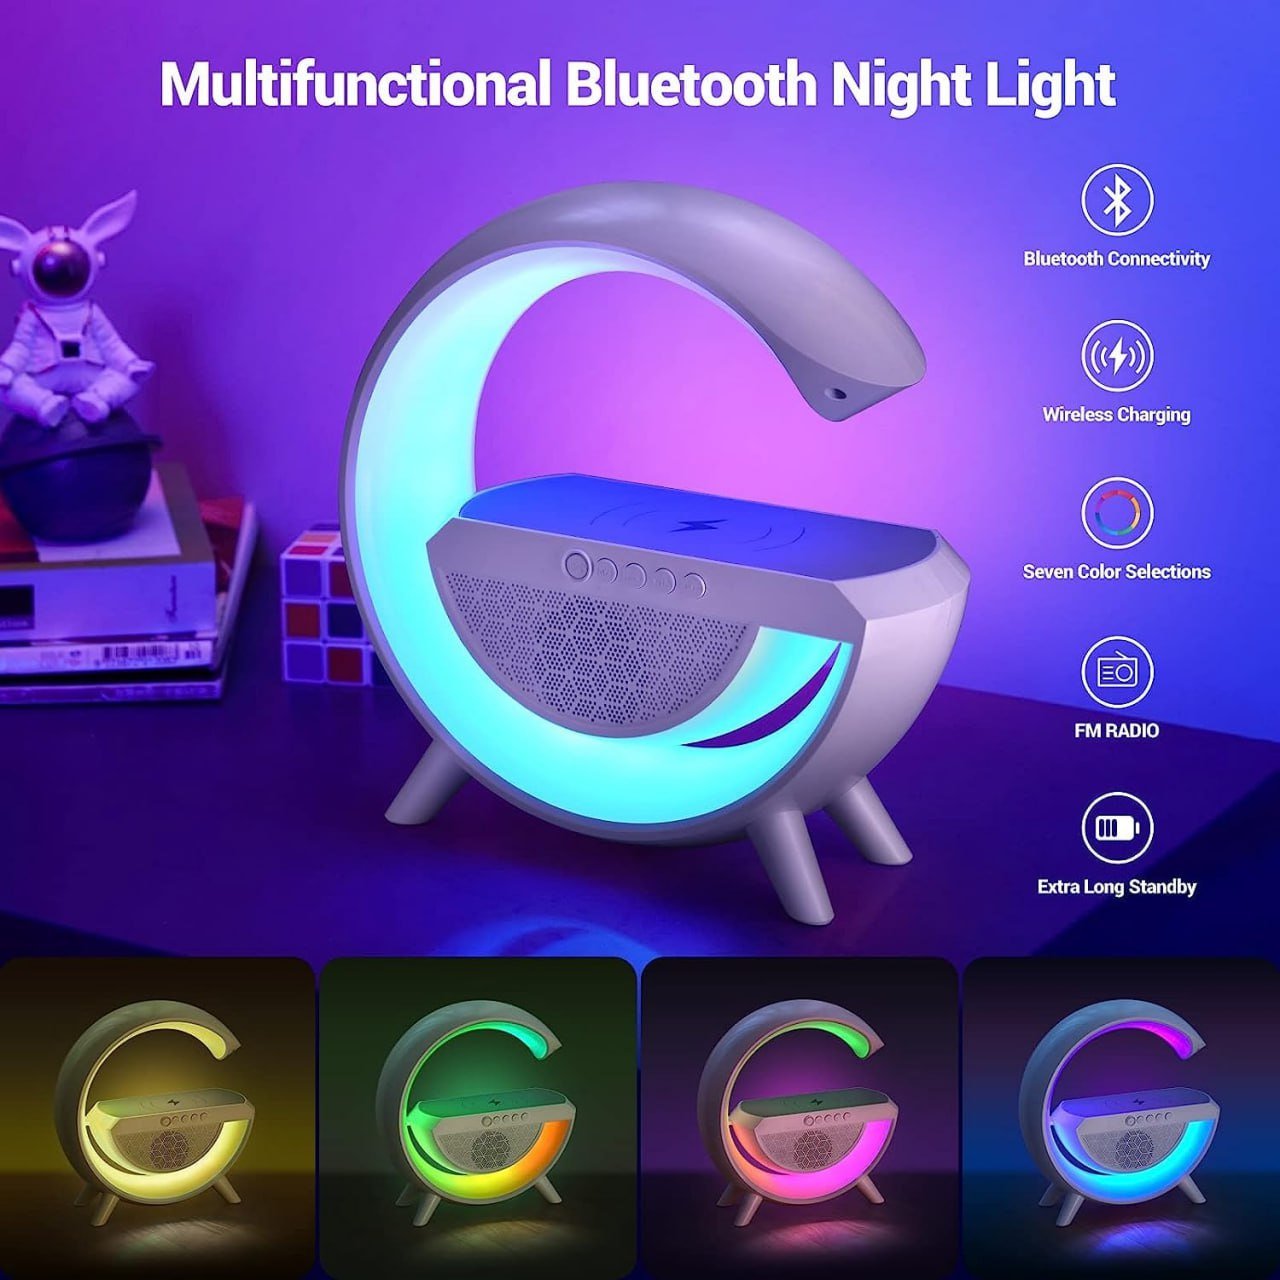 🎄Christmas Sales - 49% OFF🎅Multifunctional Bluetooth Speaker-Colorful Atmosphere Light Wireless Charging and Clock All-in-one Machine